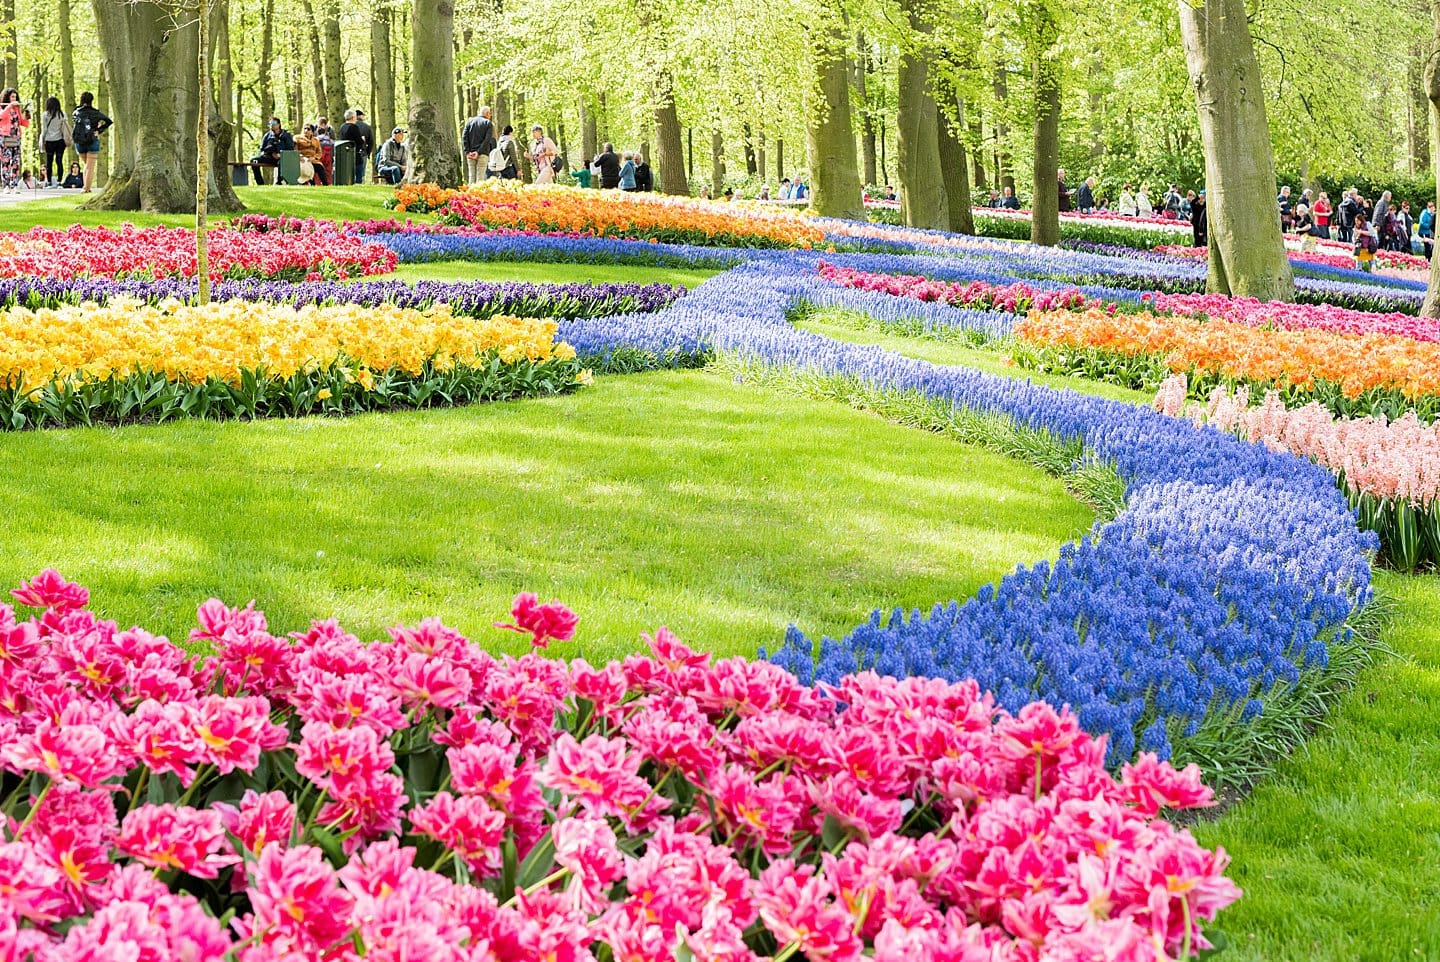 Keukenhof Gardens near Amsterdam: Everything to Know for the Best Visit